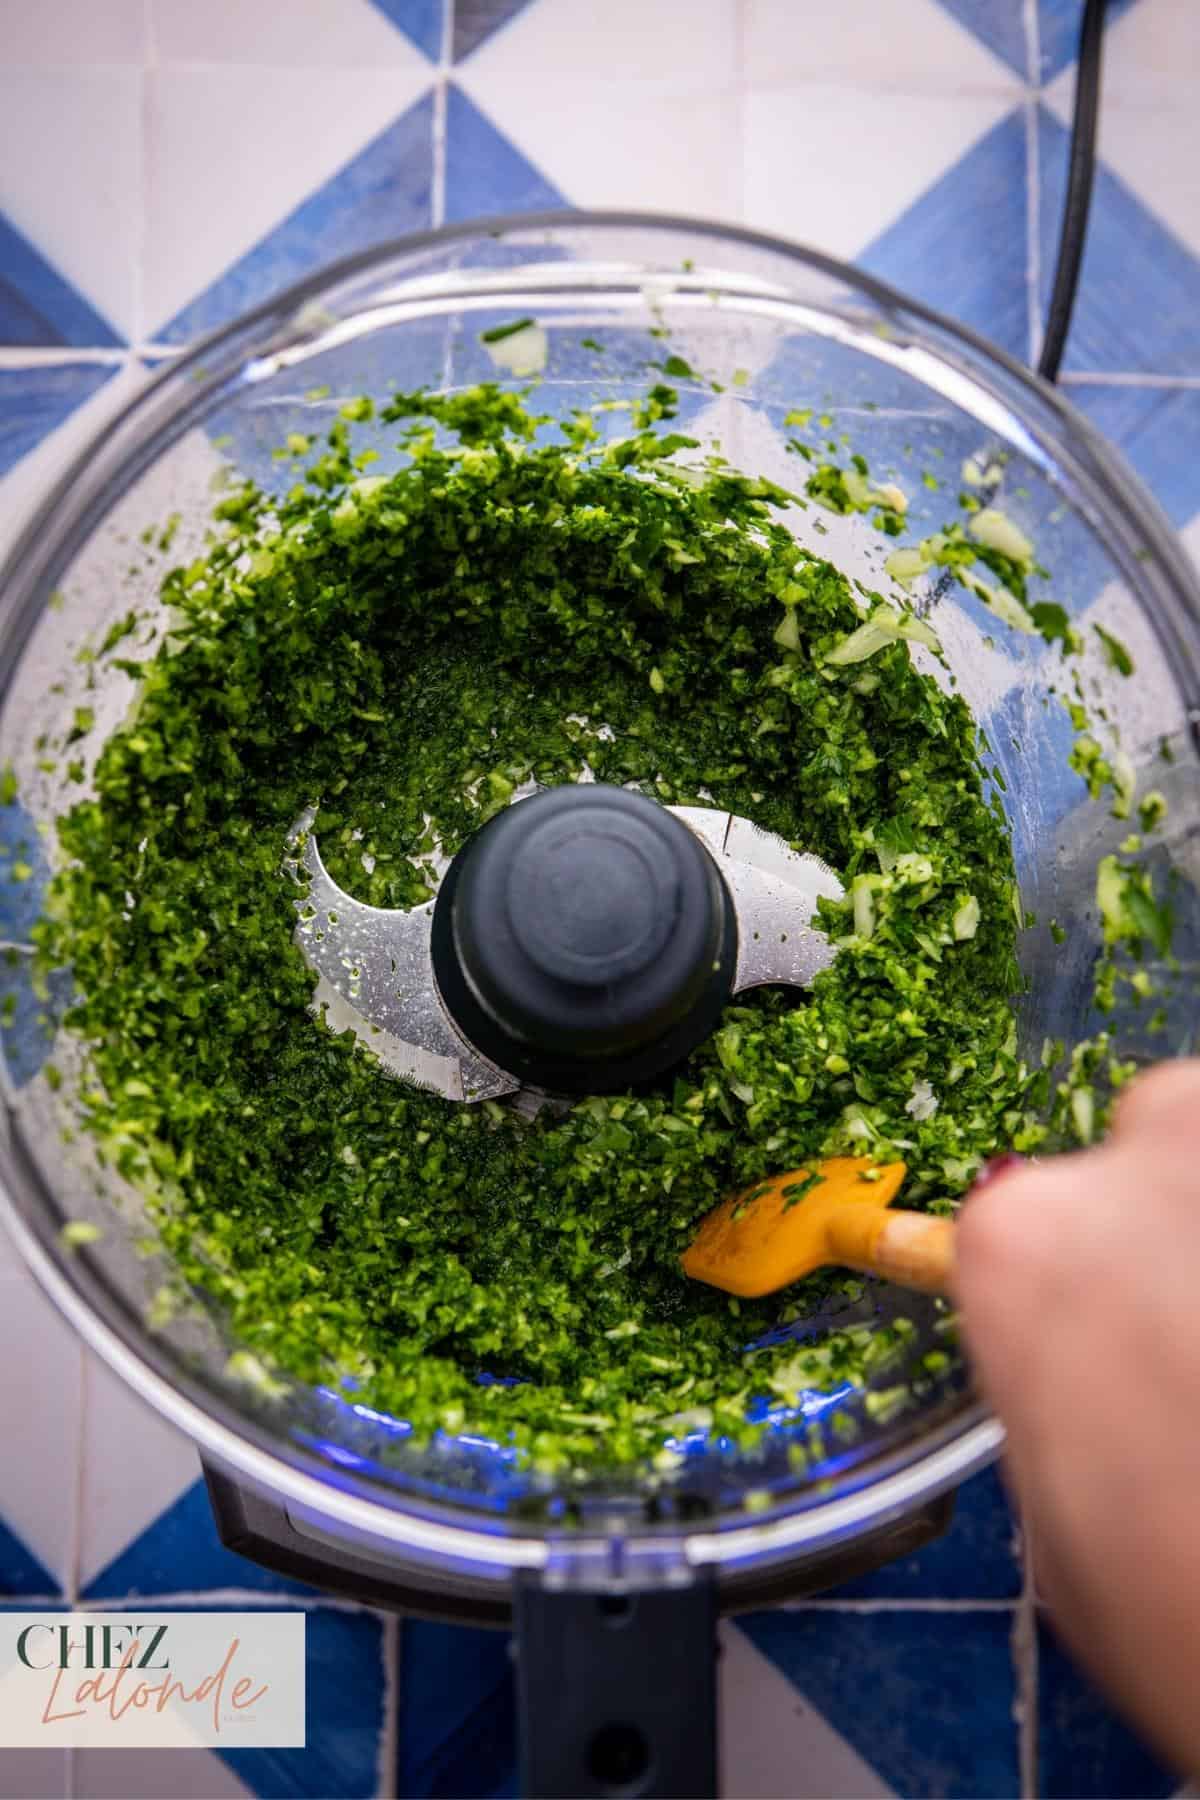 Give it a few pulses, occasionally scraping down the sides, until the herbs transform into a finely textured paste.